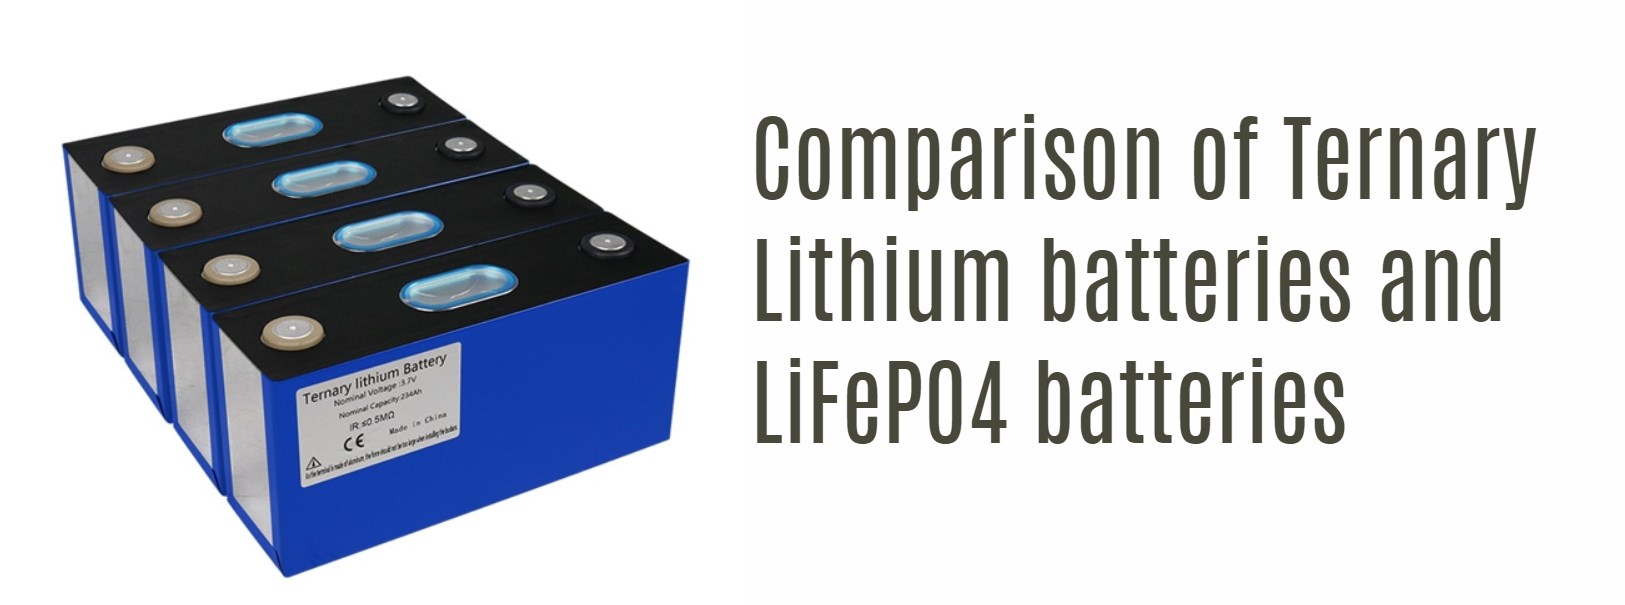 Comparison of Ternary Lithium batteries and Lithium iron phosphate(LiFePO4) batteries